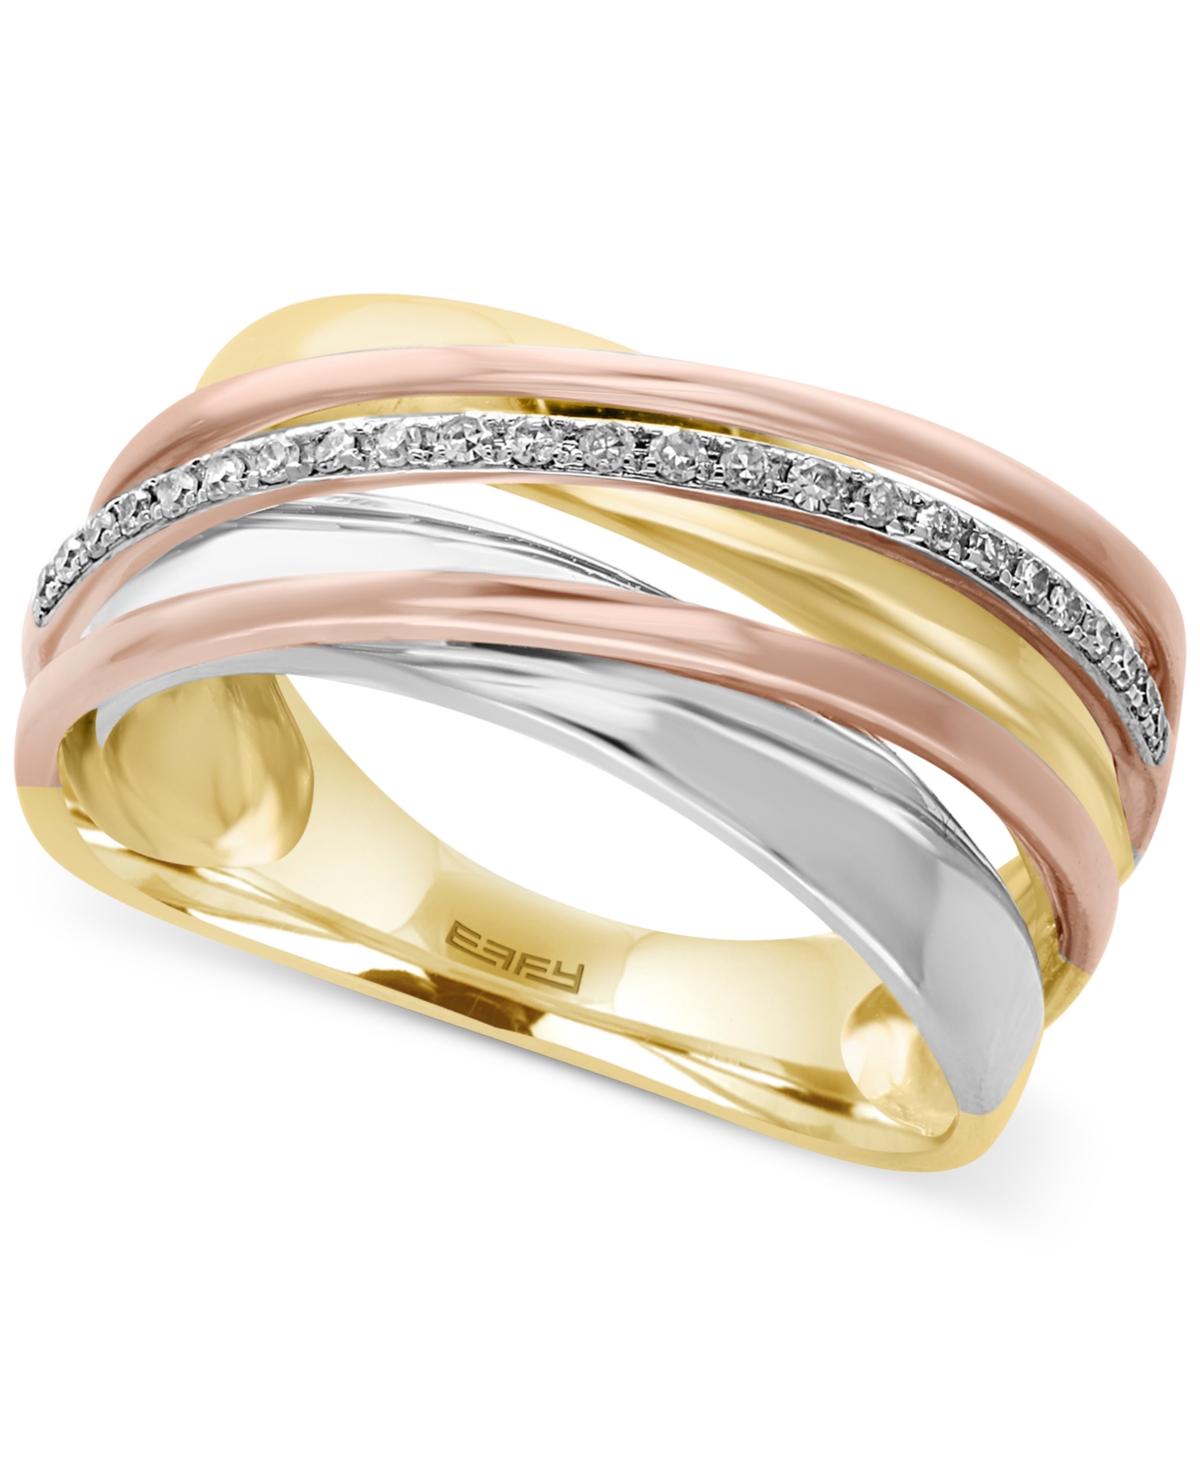 Effy Collection Effy Diamond Tri-Tone Ring (1/10 ct. t.w.) in 14k Yellow, White and Rose Gold